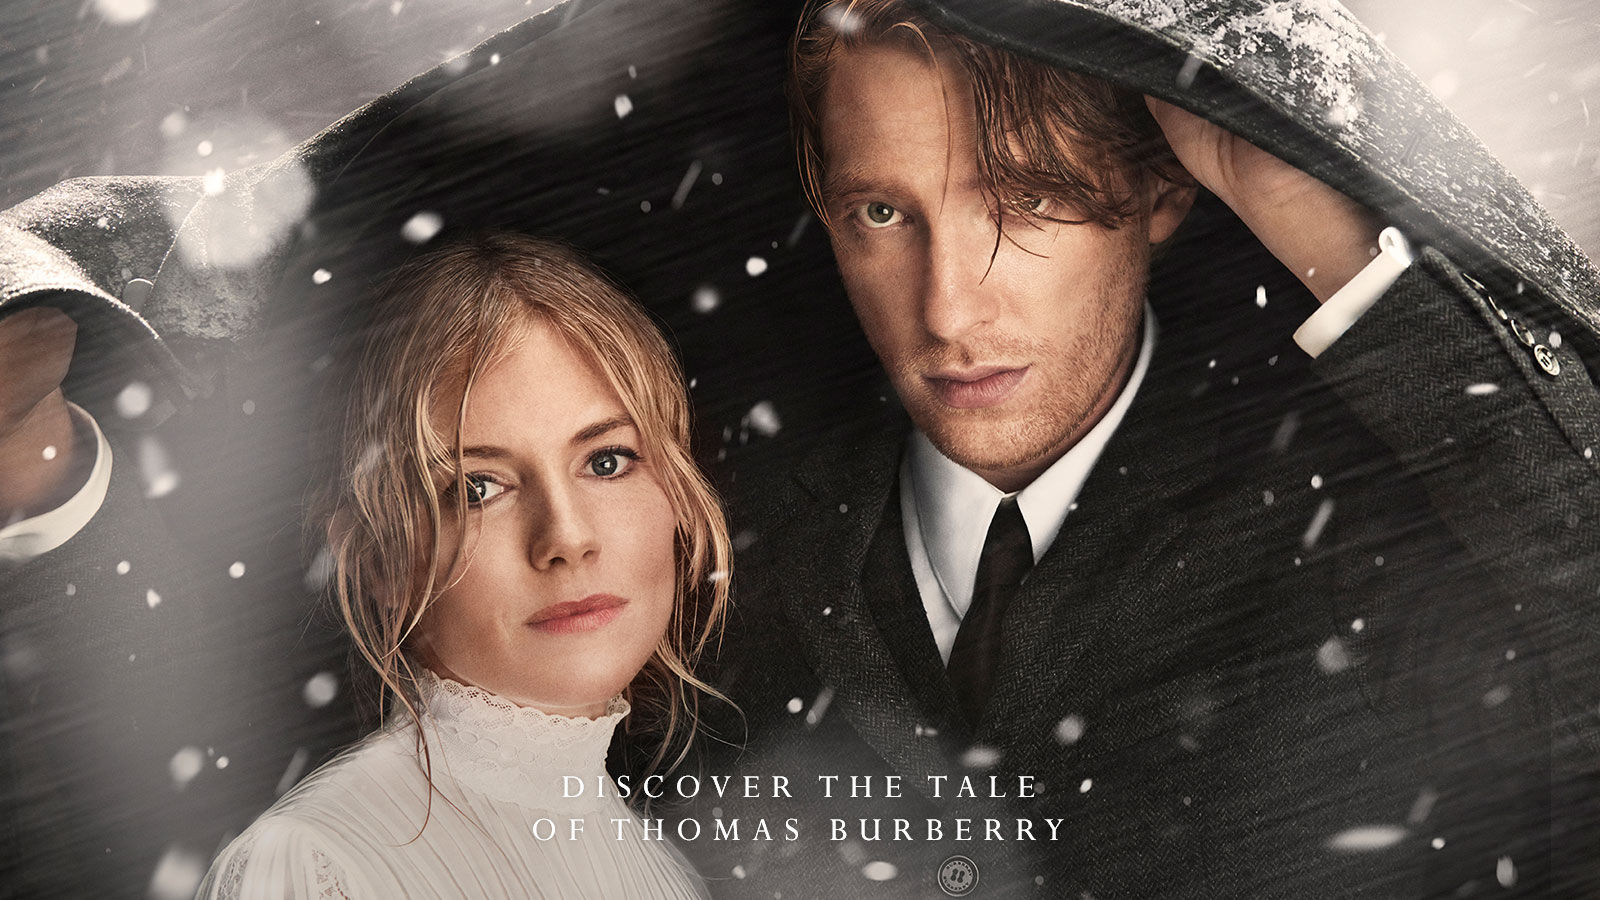 Video: Celebrate a very Burberry Christmas with The Tale of Thomas Burberry